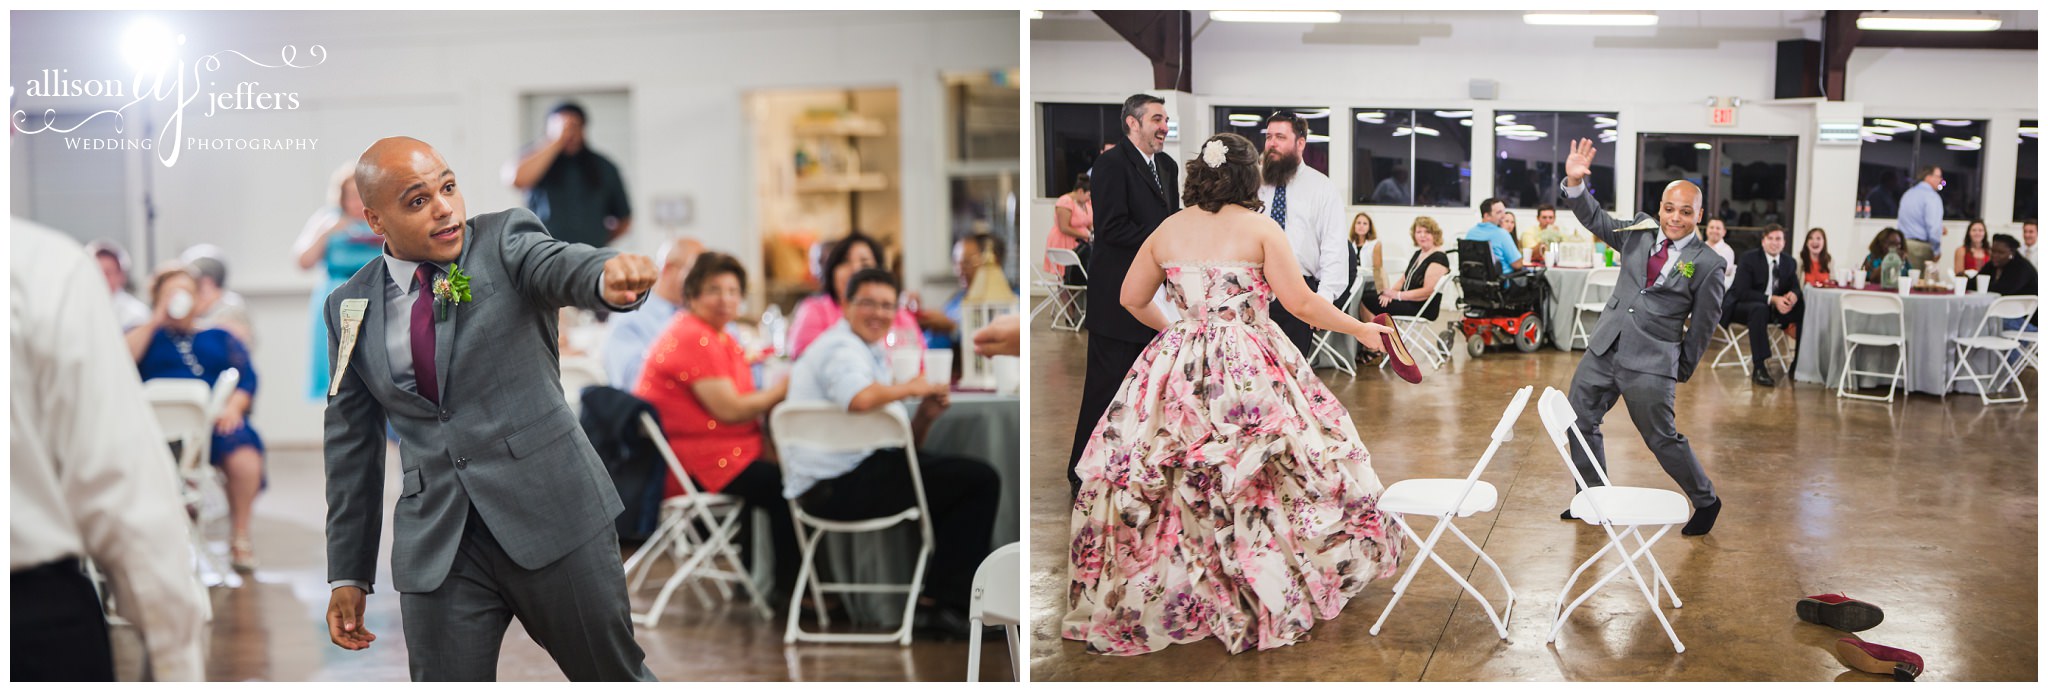 Kerrville Wedding Photographer Unique fun wedding with floral dress 0085